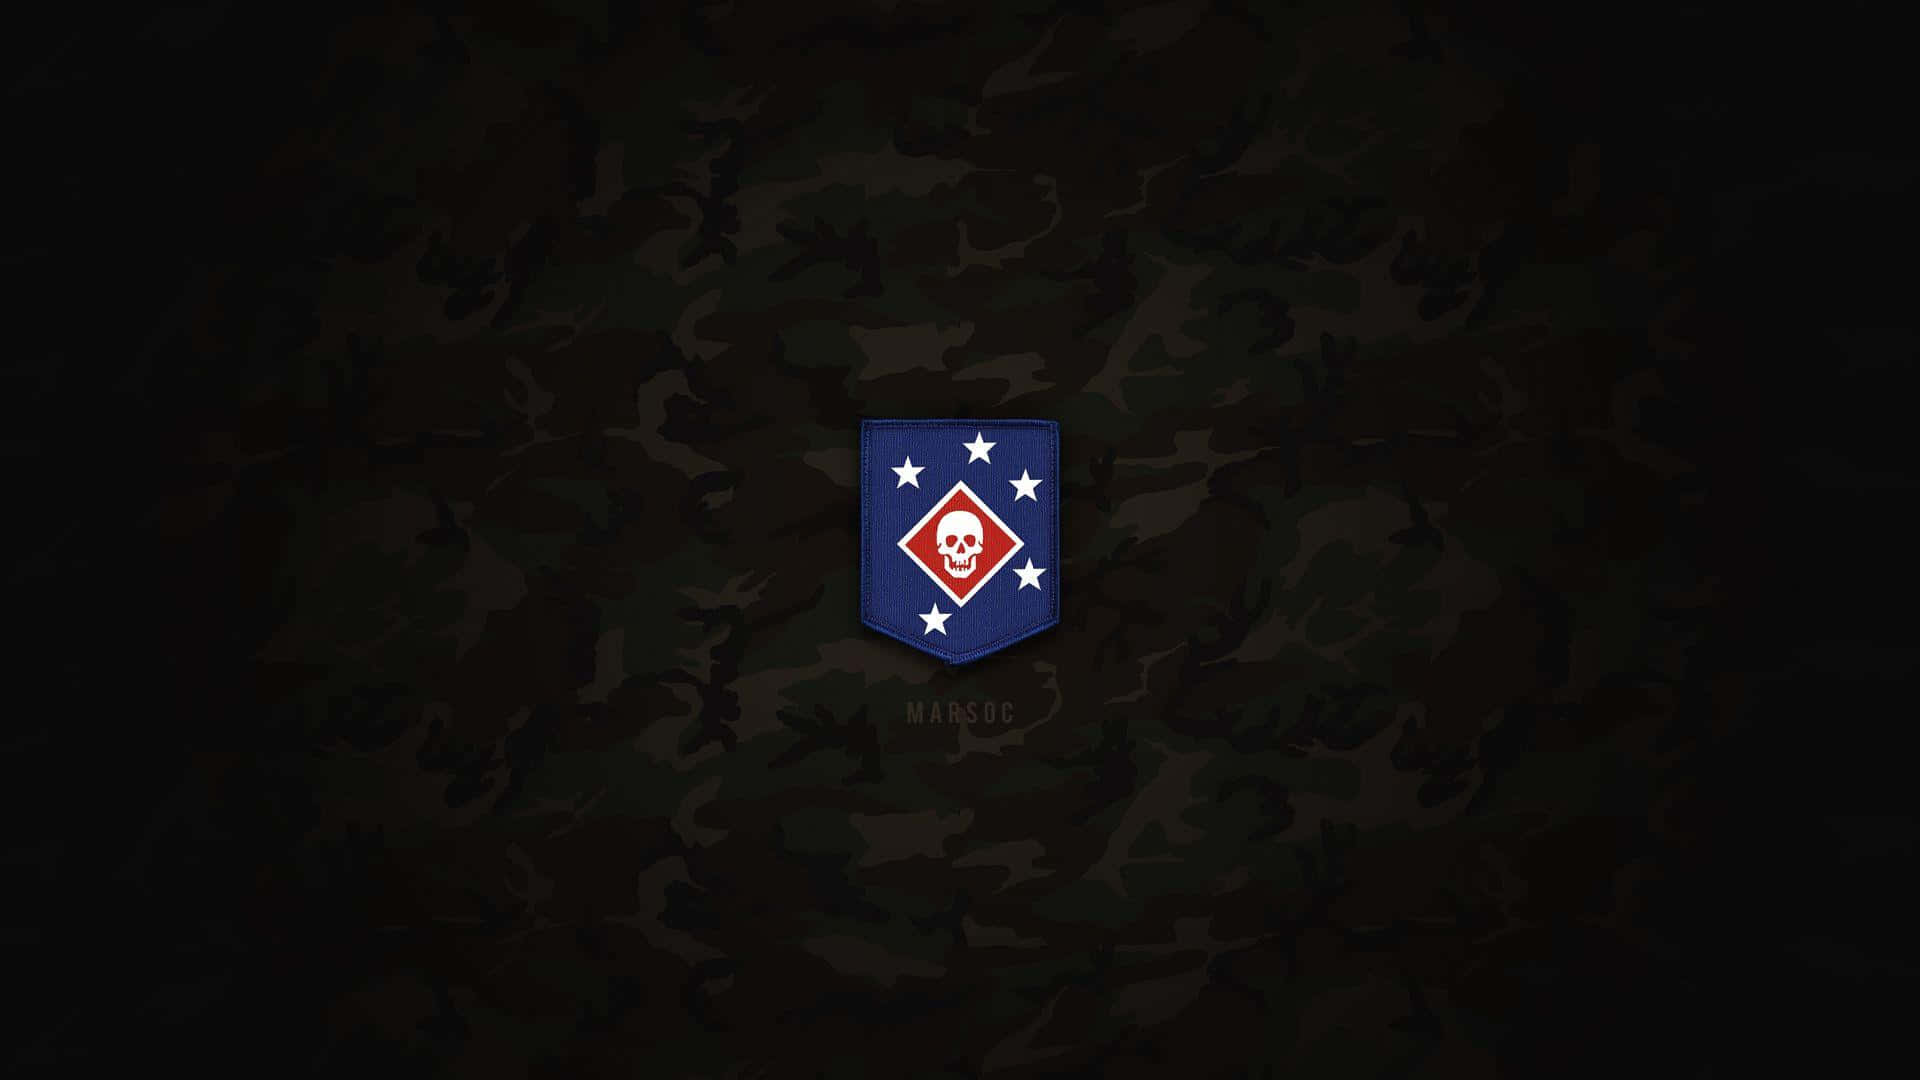 A Camouflage Background With A Military Emblem Wallpaper